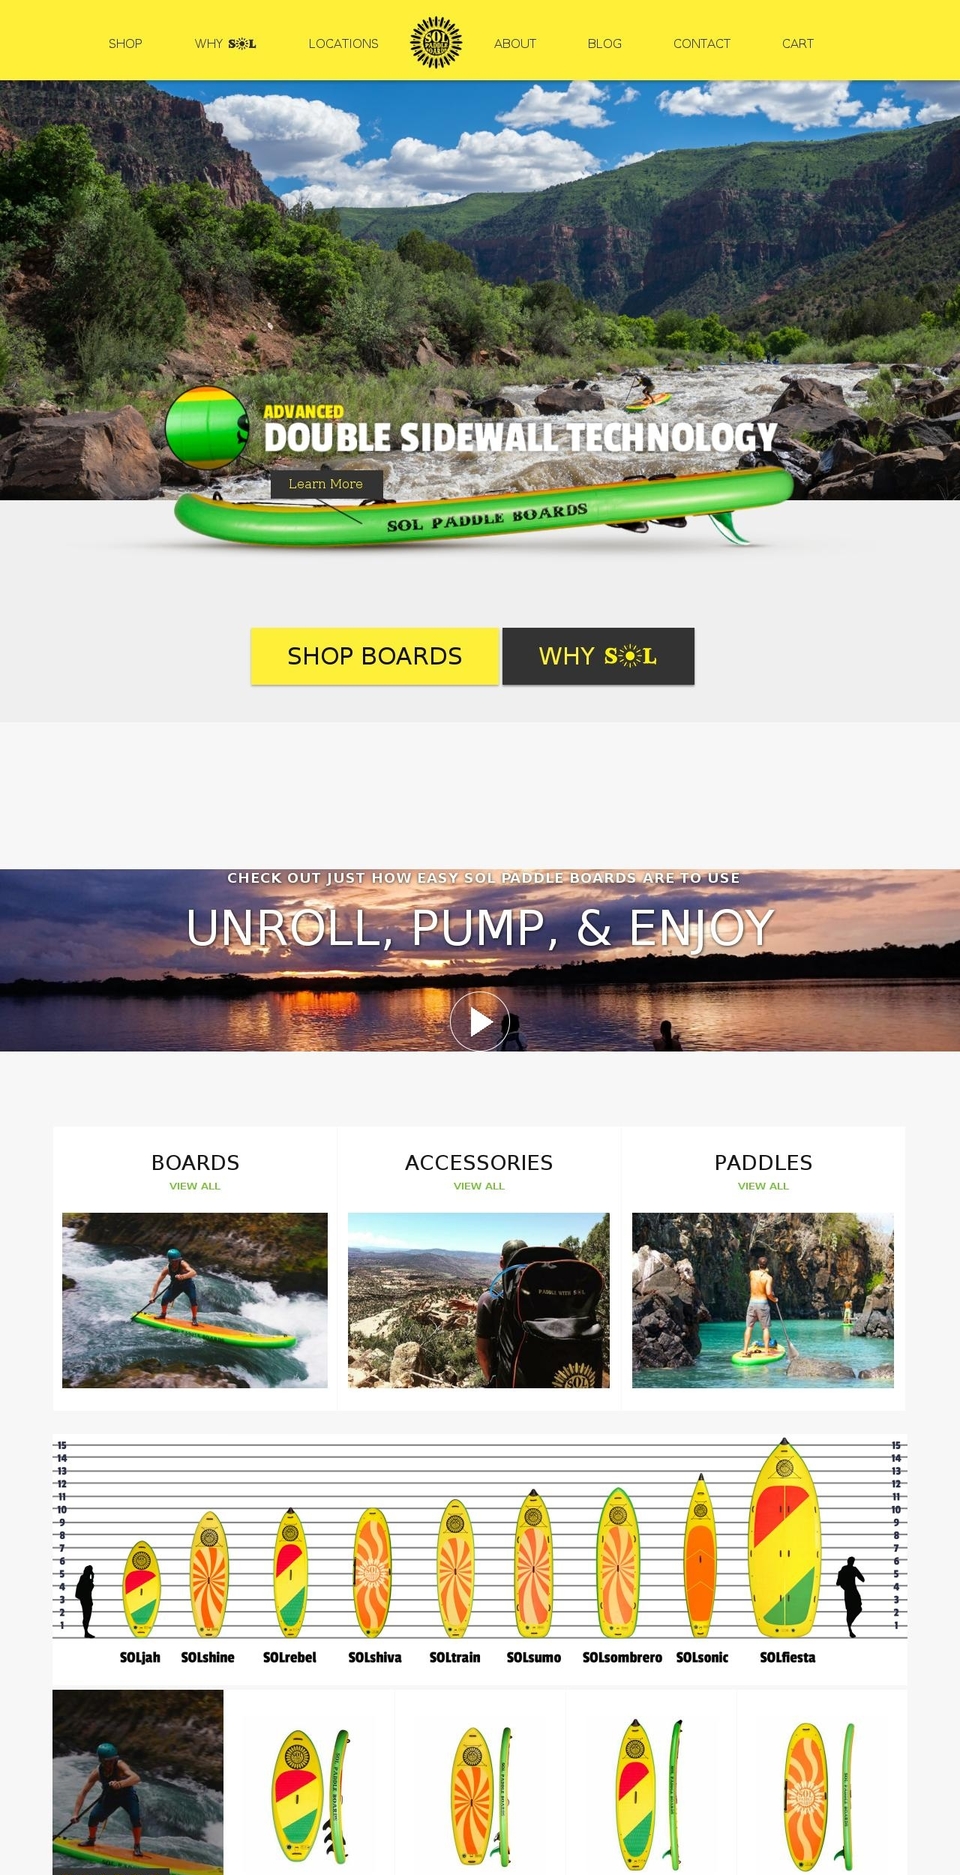 Origin Shopify theme site example solpaddleboards.com